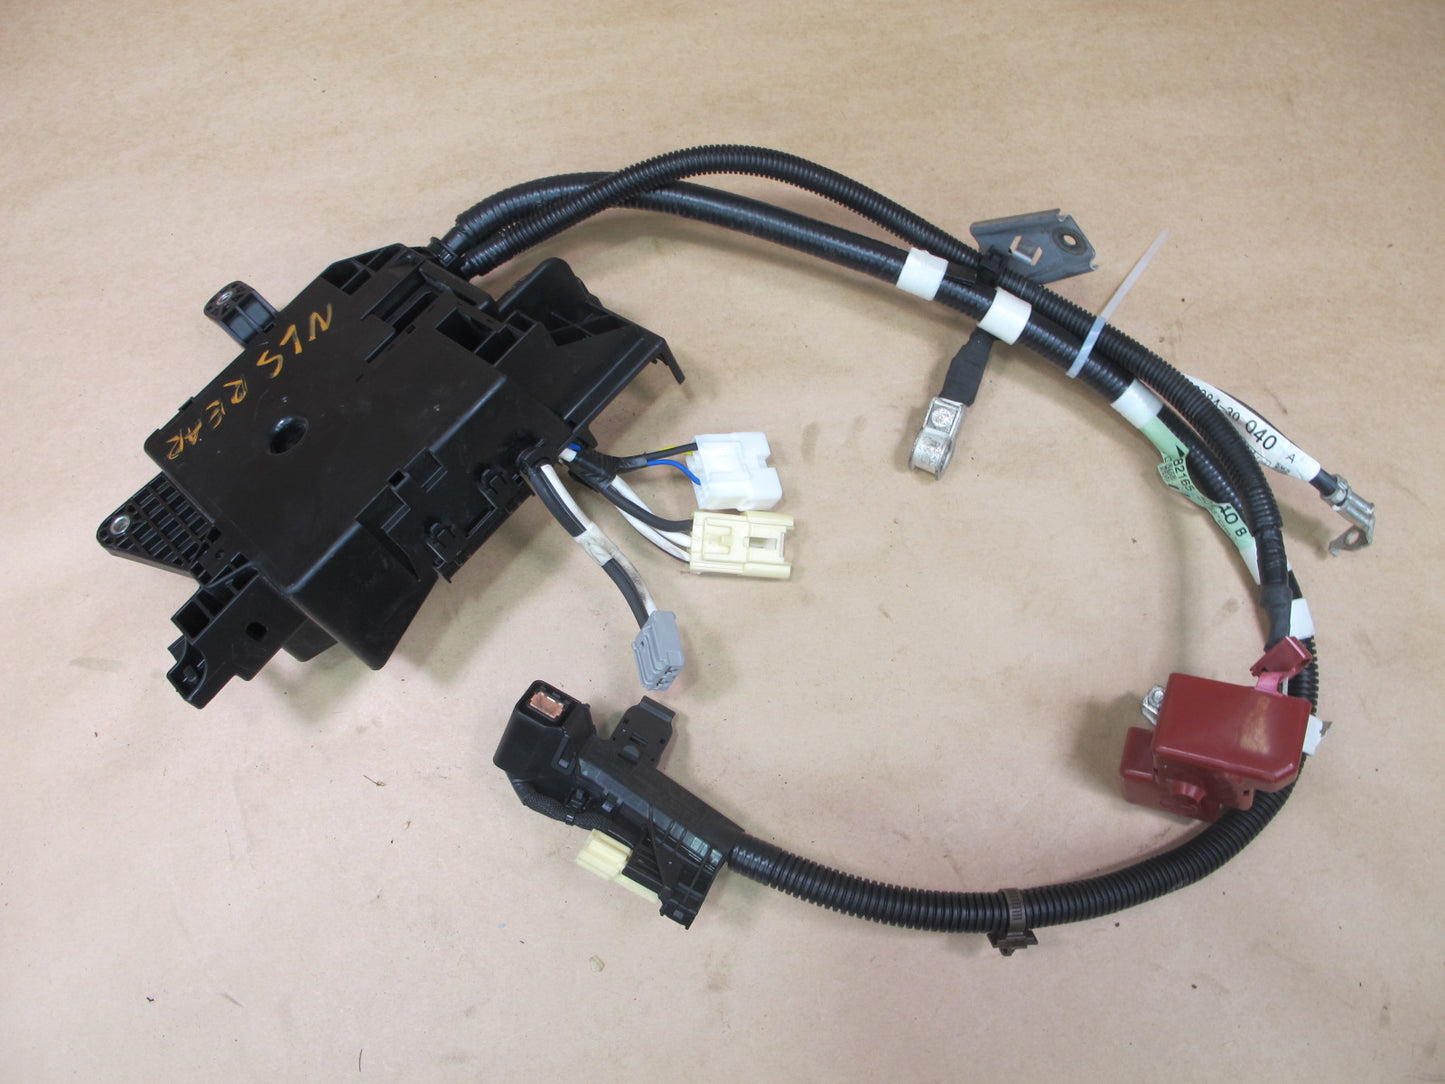 08-09 LEXUS UVF46 LS600h HYBRID REAR FUSE JUNCTION BOX BATTERY CABLE OEM